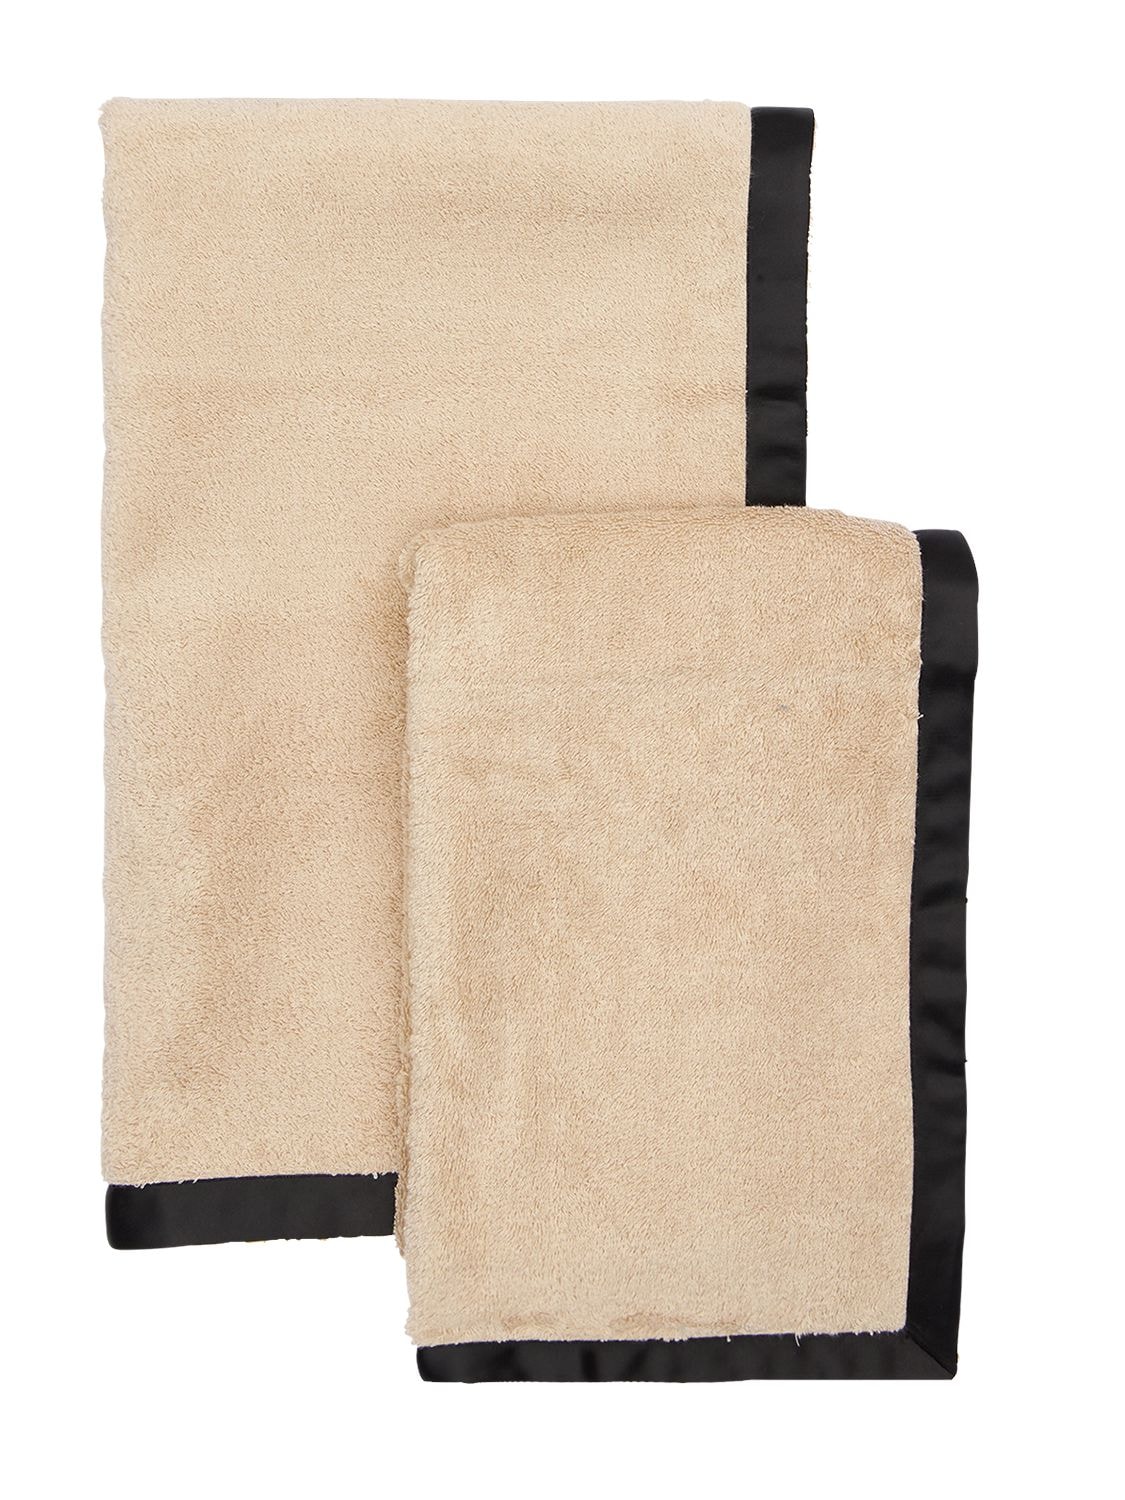 Alessandro Di Marco Set Of 2 Cotton Terrycloth Towels In Beige,black